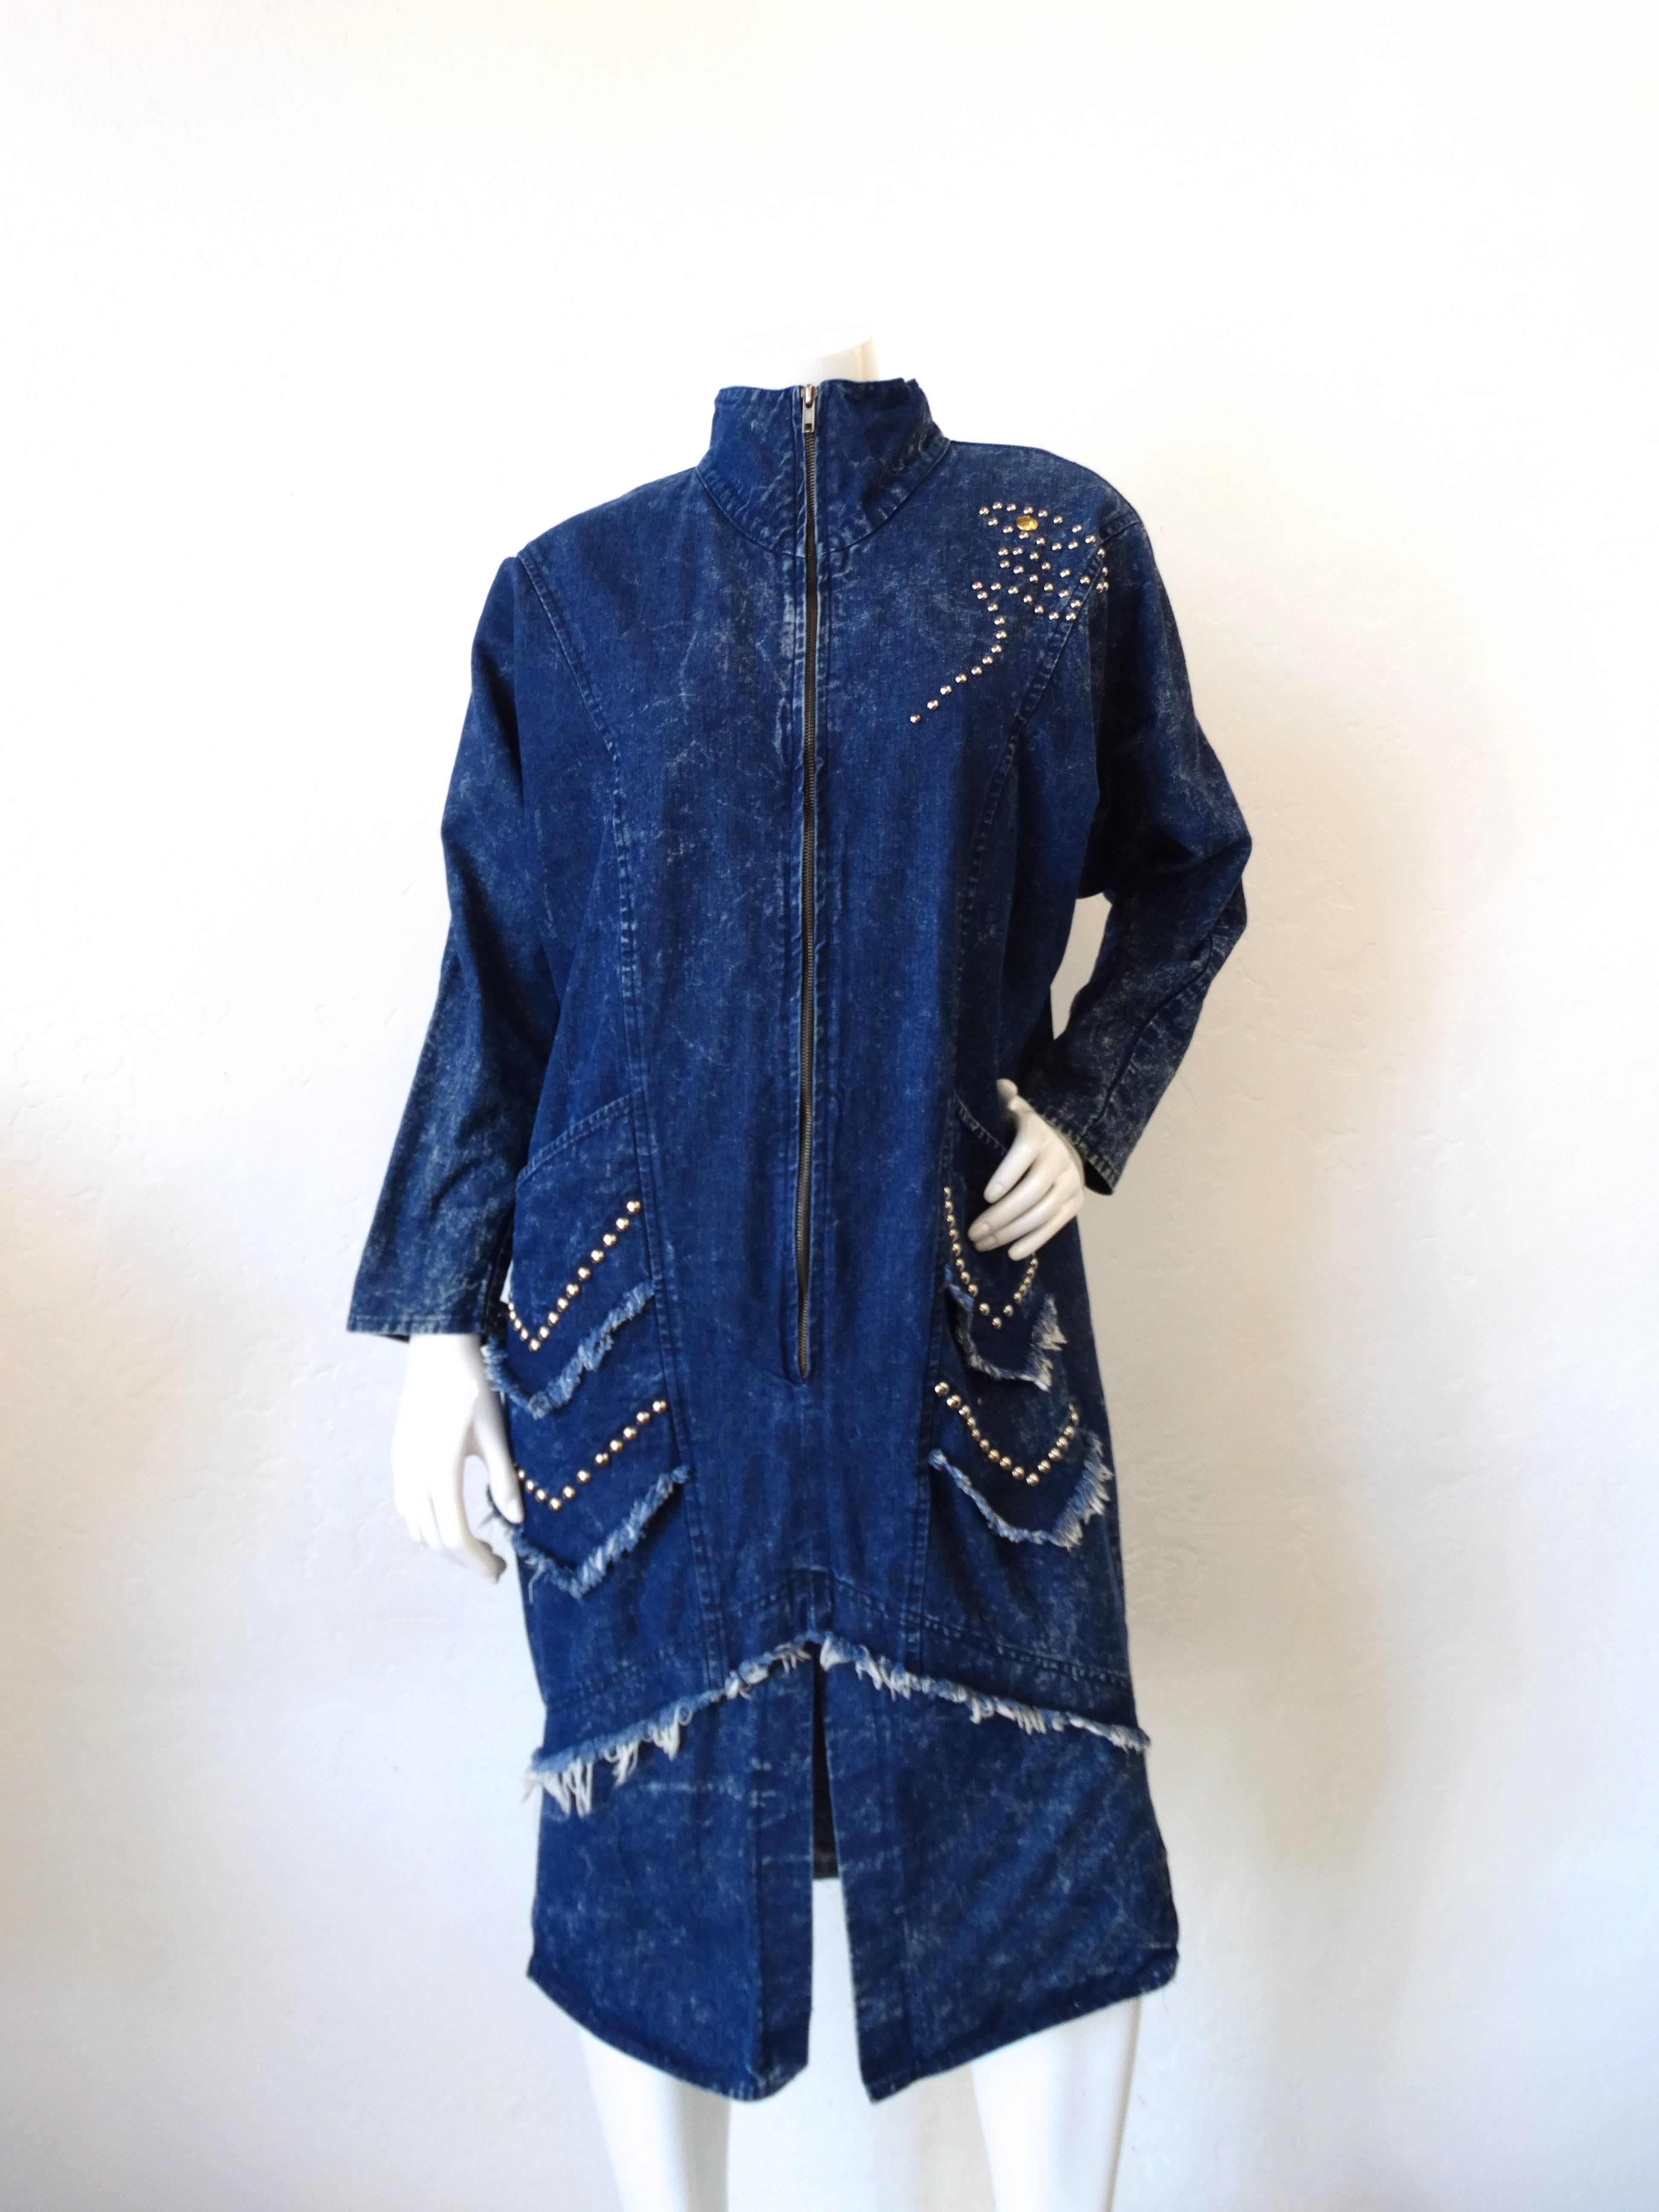 Satiate your denim addiction with our 1980s Denim Dress! Cocoon coat like fit with zipper up the front. Accented with frayed chevron stripes and studs. Zip all the way up for a more mod look, or leave unzipped a bit to sex it up. 

Shoulder: 19 in